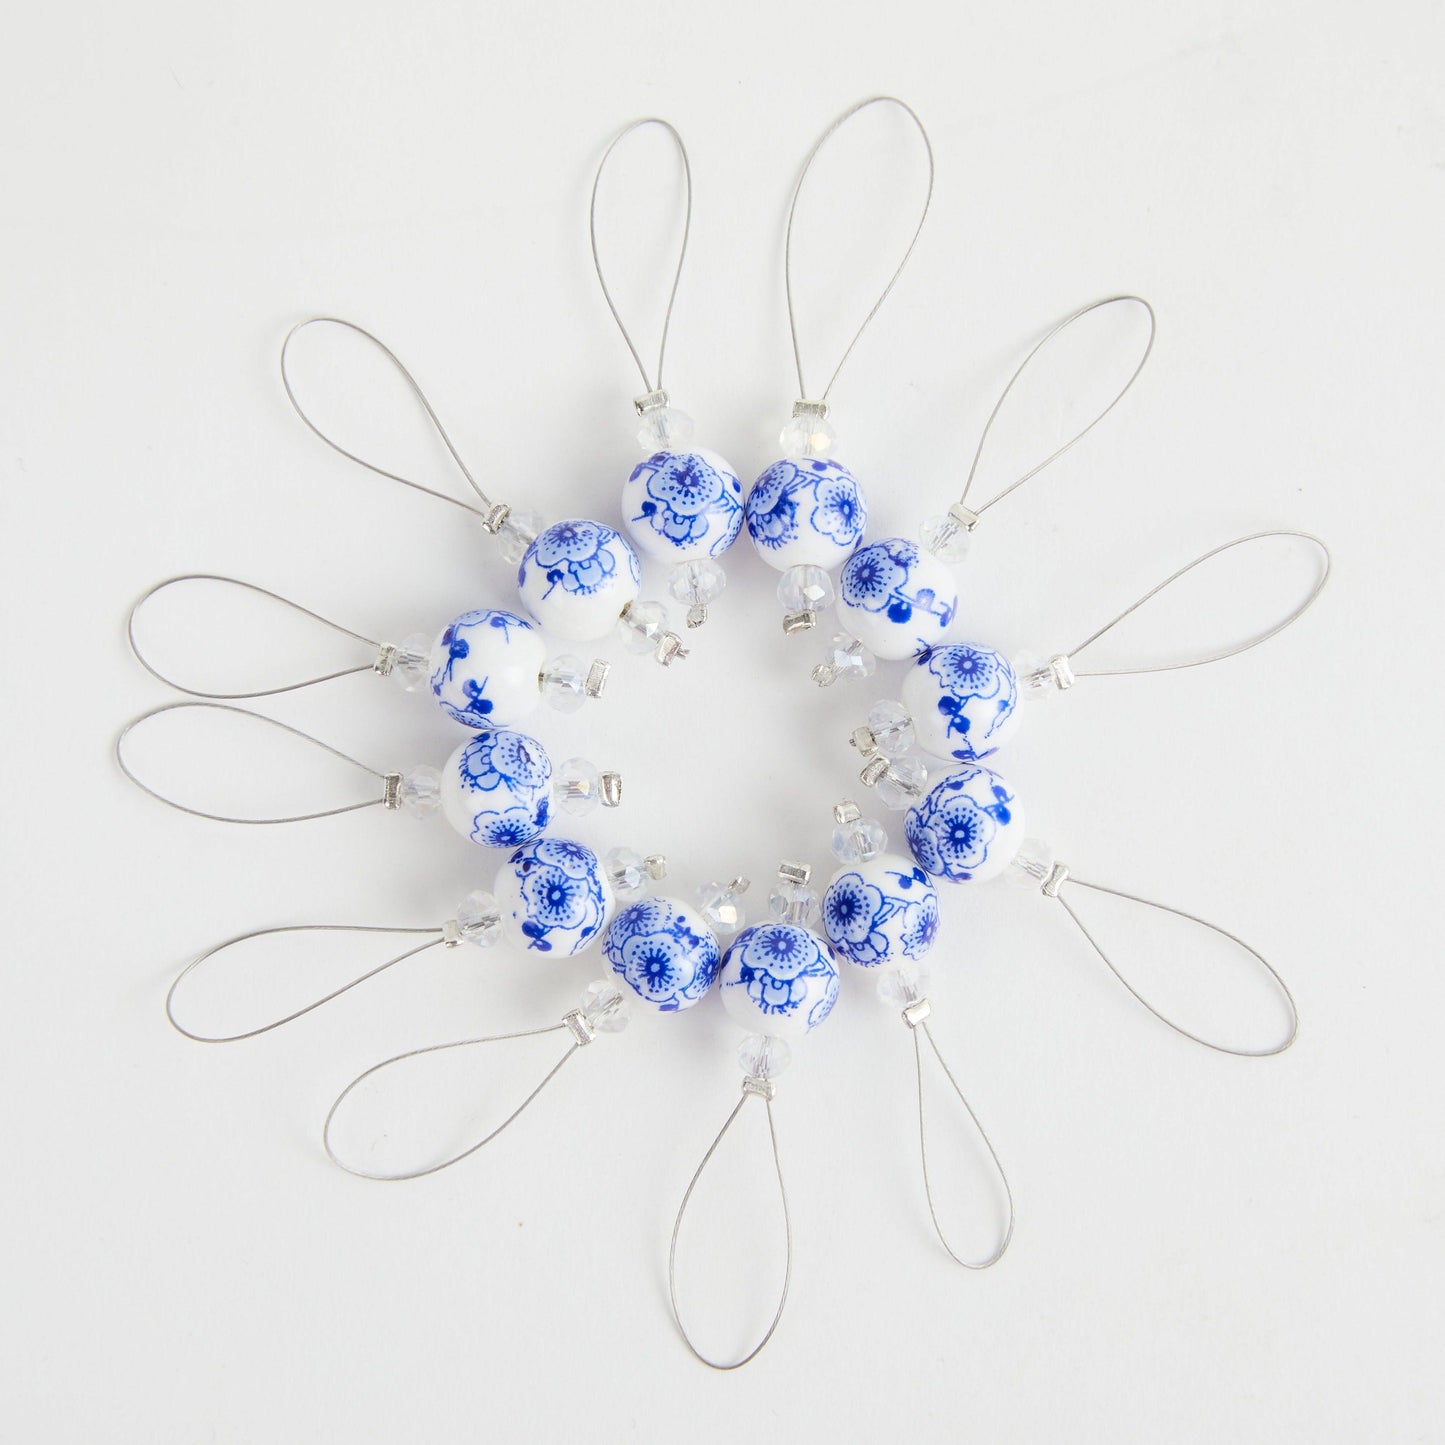 KnitPro NEW ZOONI Stitch Markers in Playful Beads "Blooming Blue" (11256)